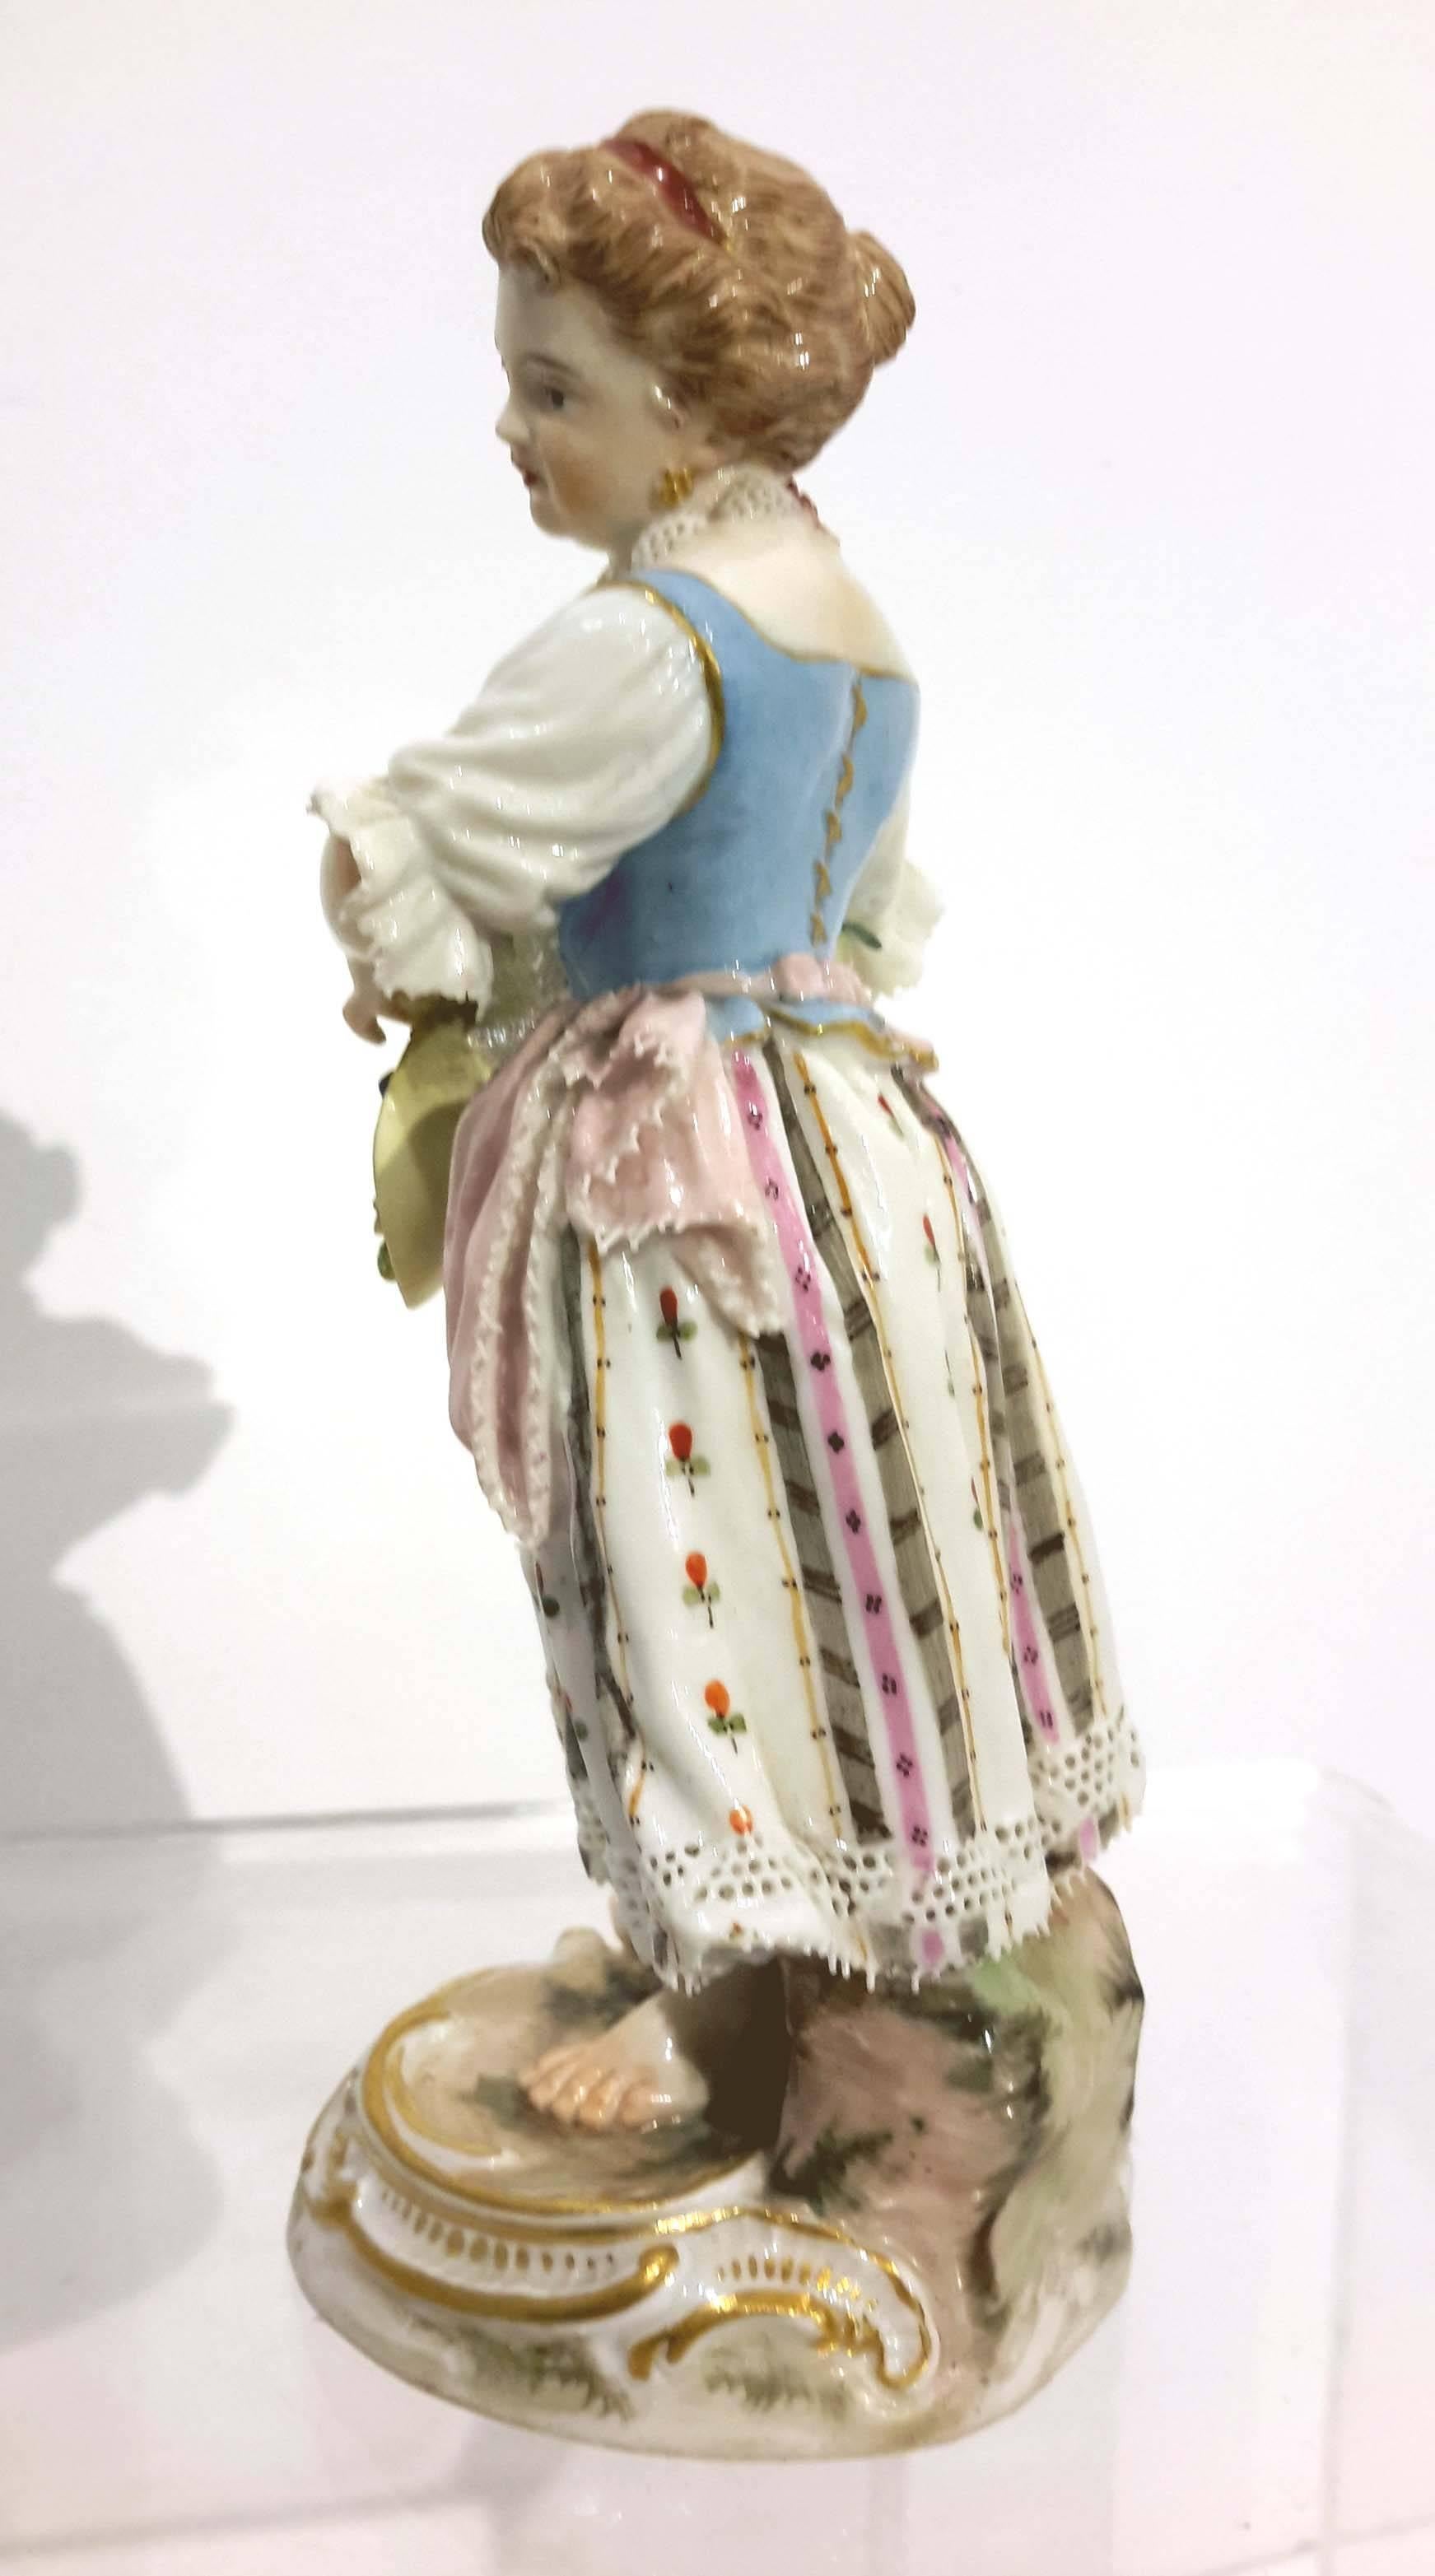 German Meissen Porcelain Figure of Girl with Flowers, 19th Century